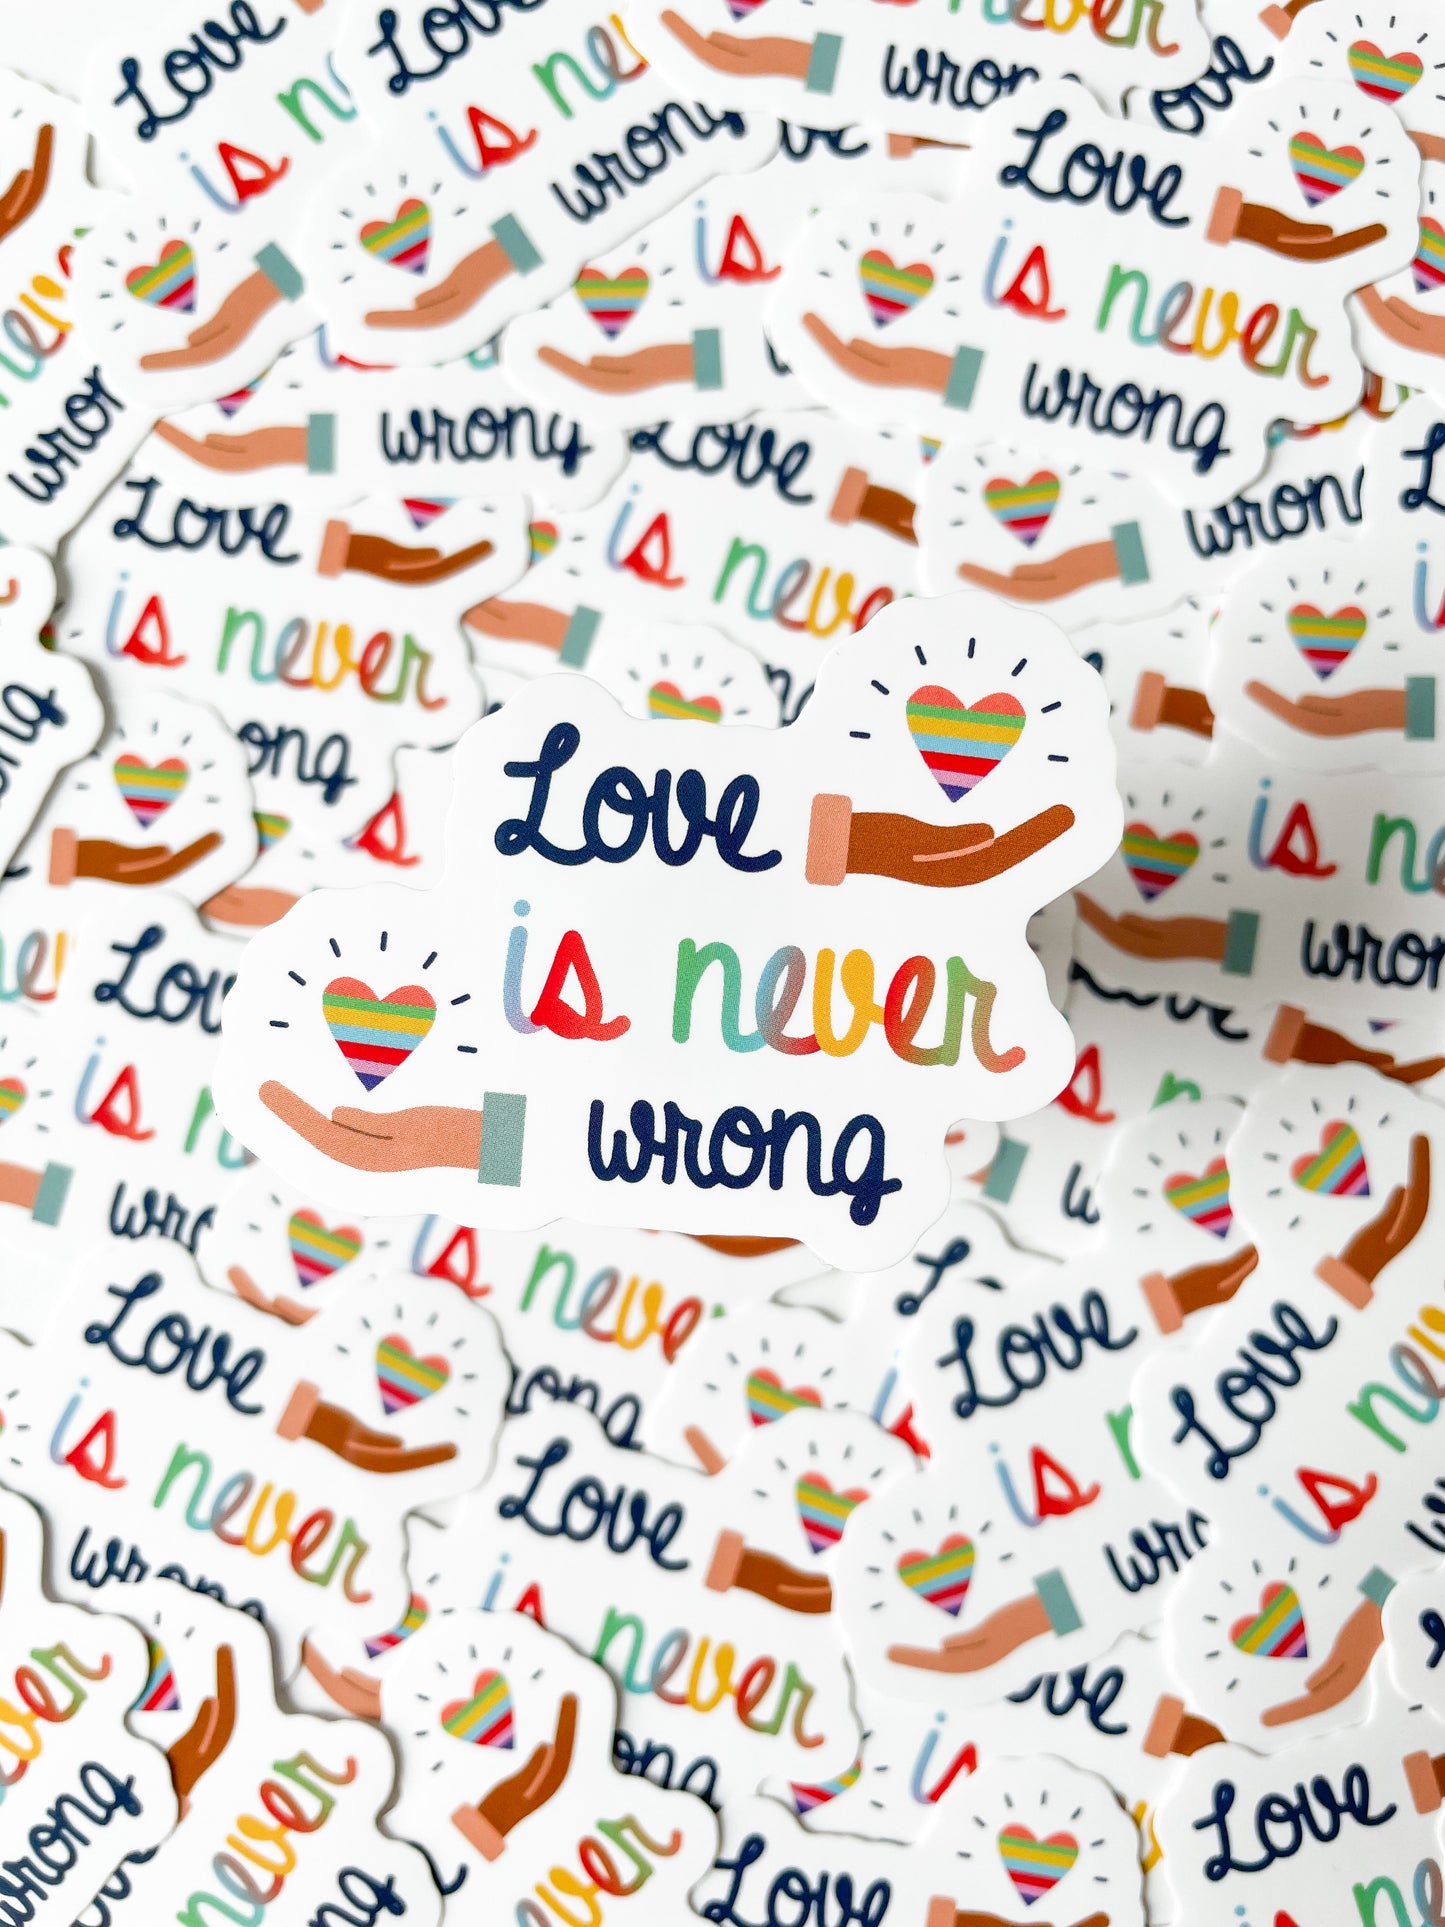 Love is Never Wrong Sticker